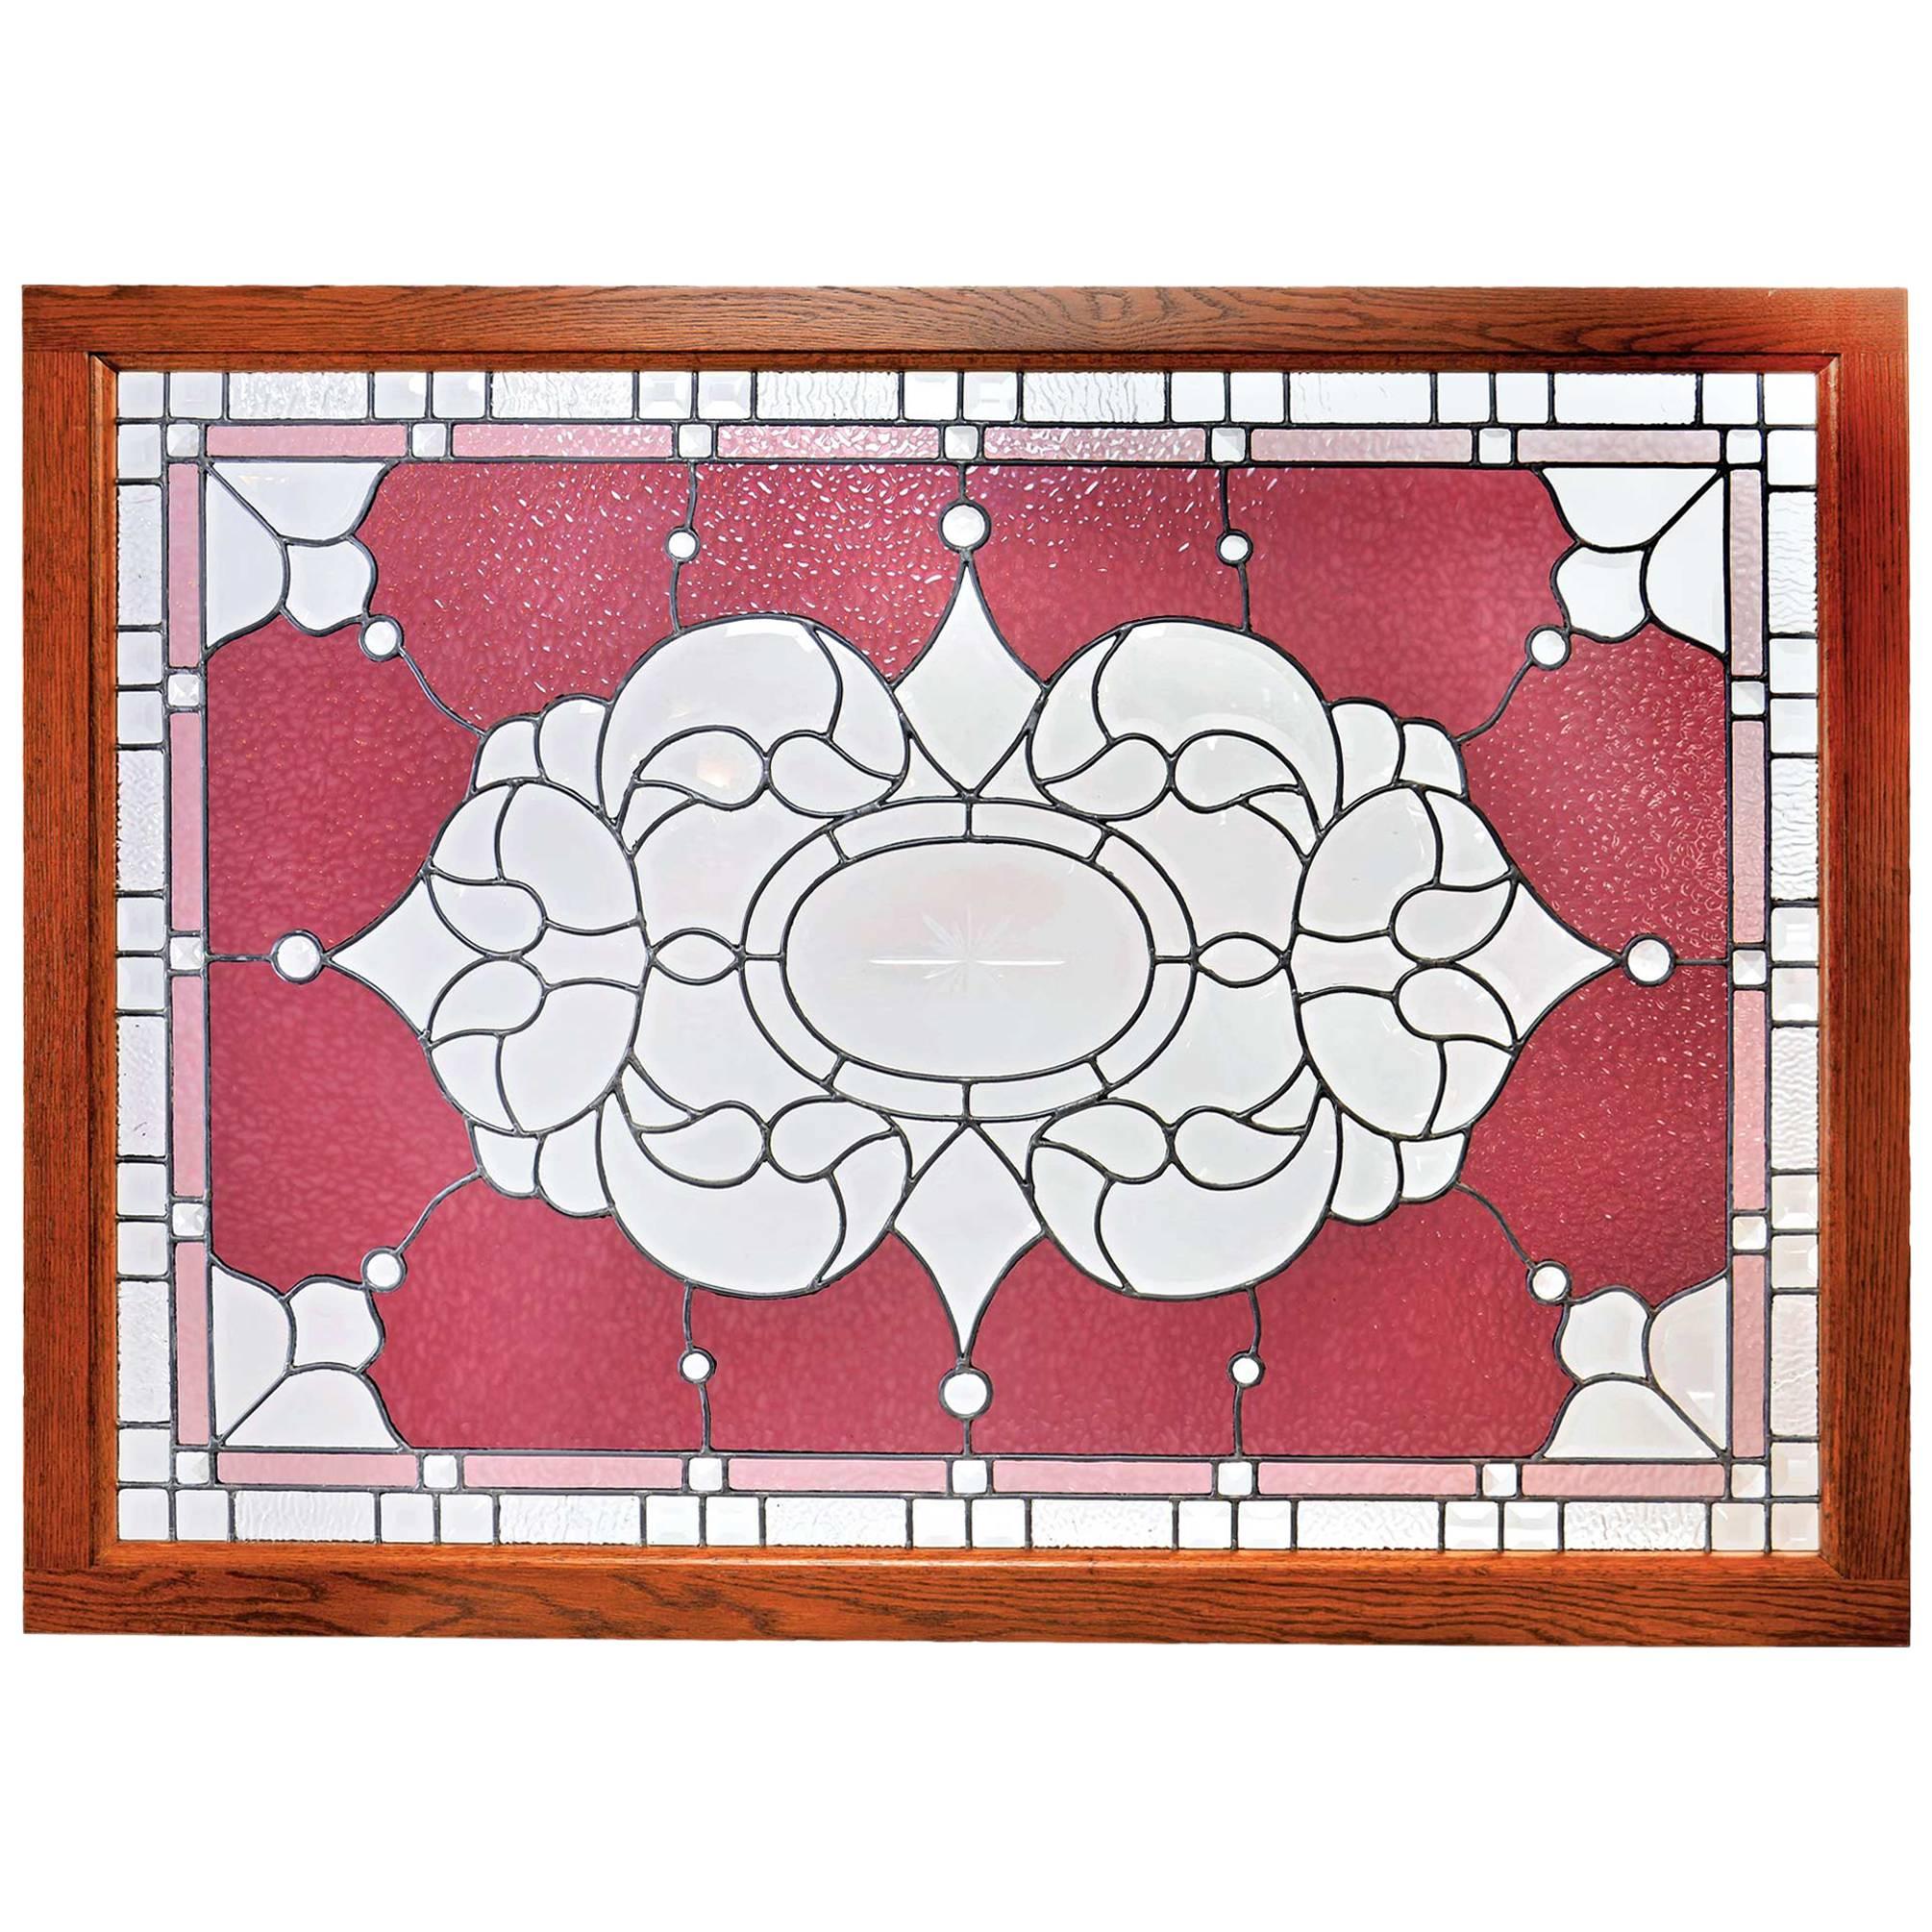 Large Victorian Landing Window with Cranberry Rippled Glass and Zippercut Center